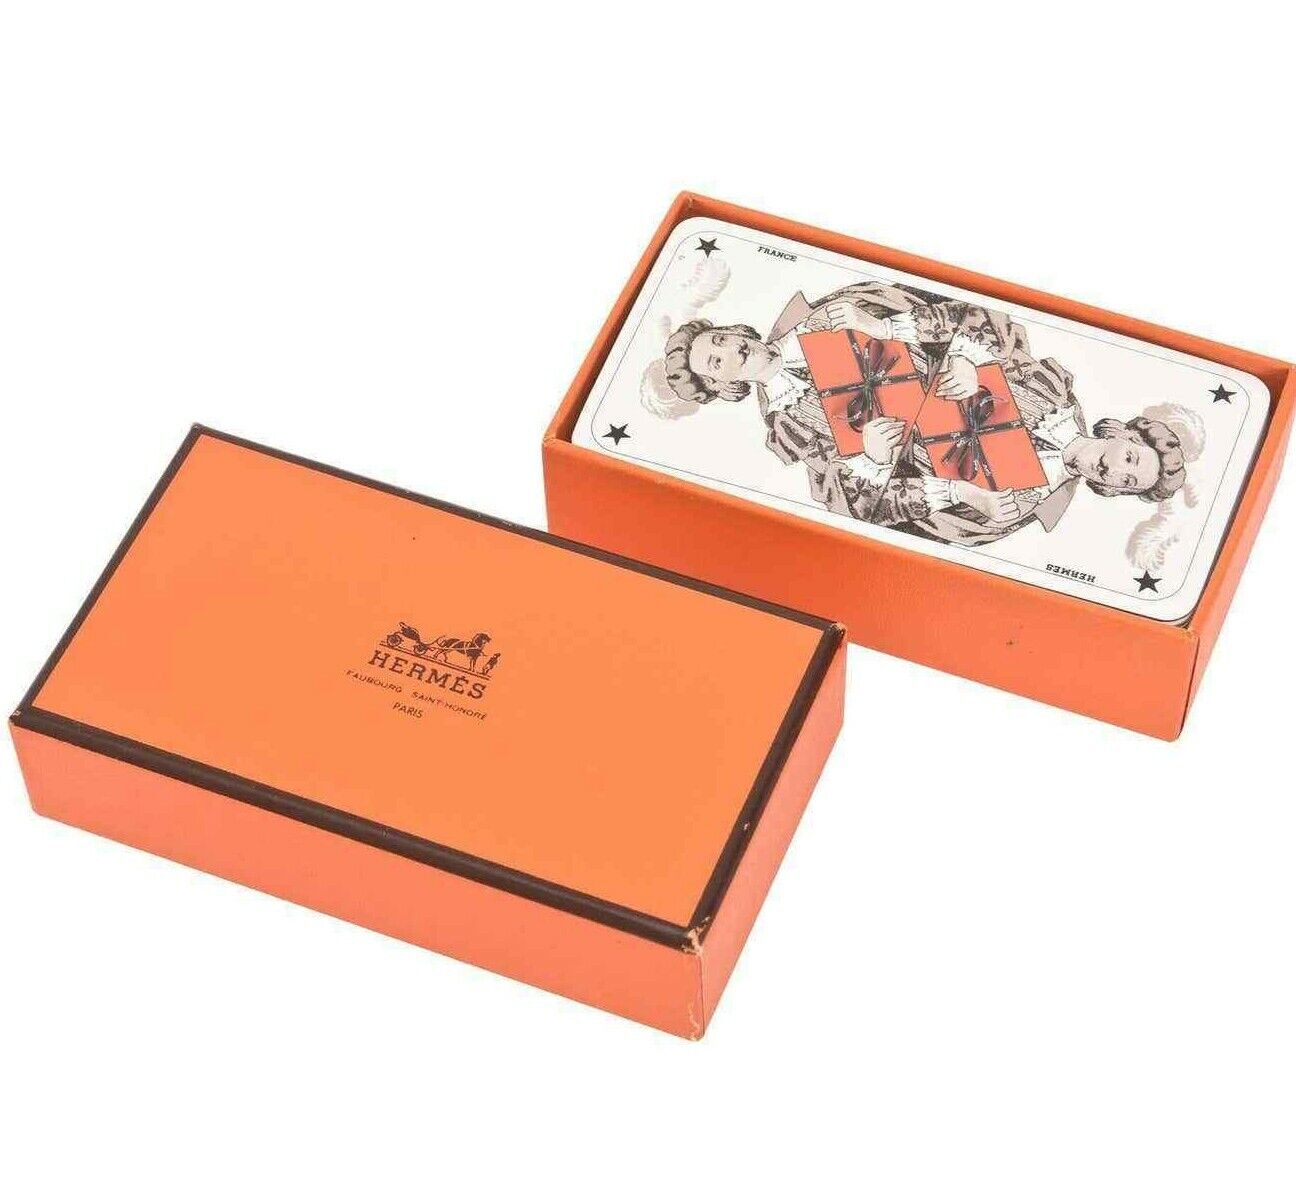 Vintage HERMES PARIS Tarot Playing Cards with Manual w/ Case (New & Sealed )